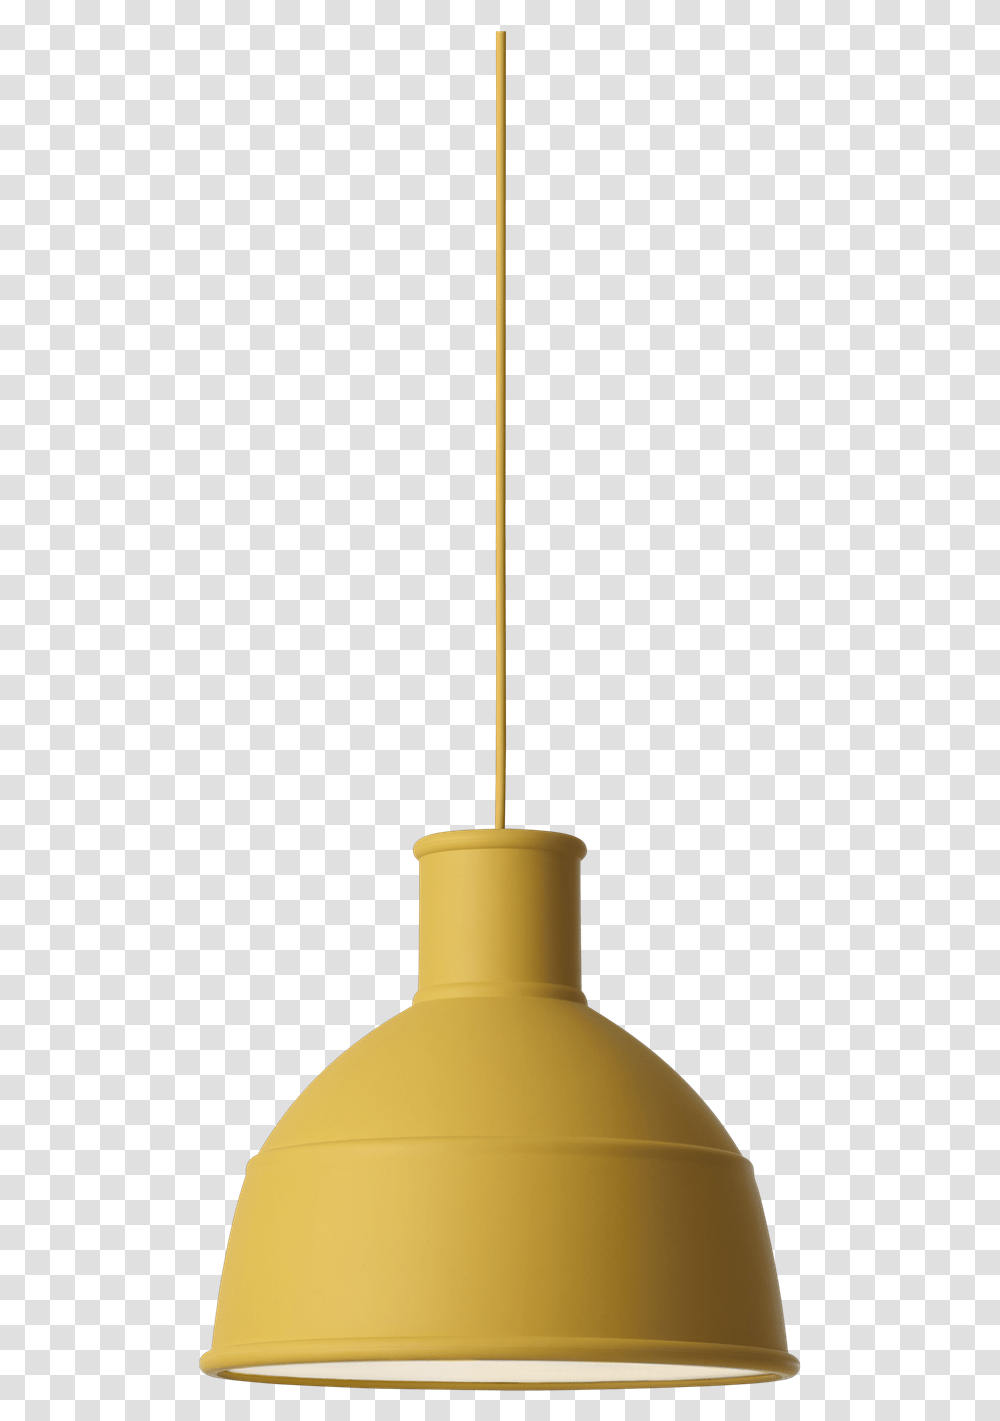 Unfold Mustard Muuto Unfold Mustard, Lamp, Weapon, Weaponry, Candle Transparent Png